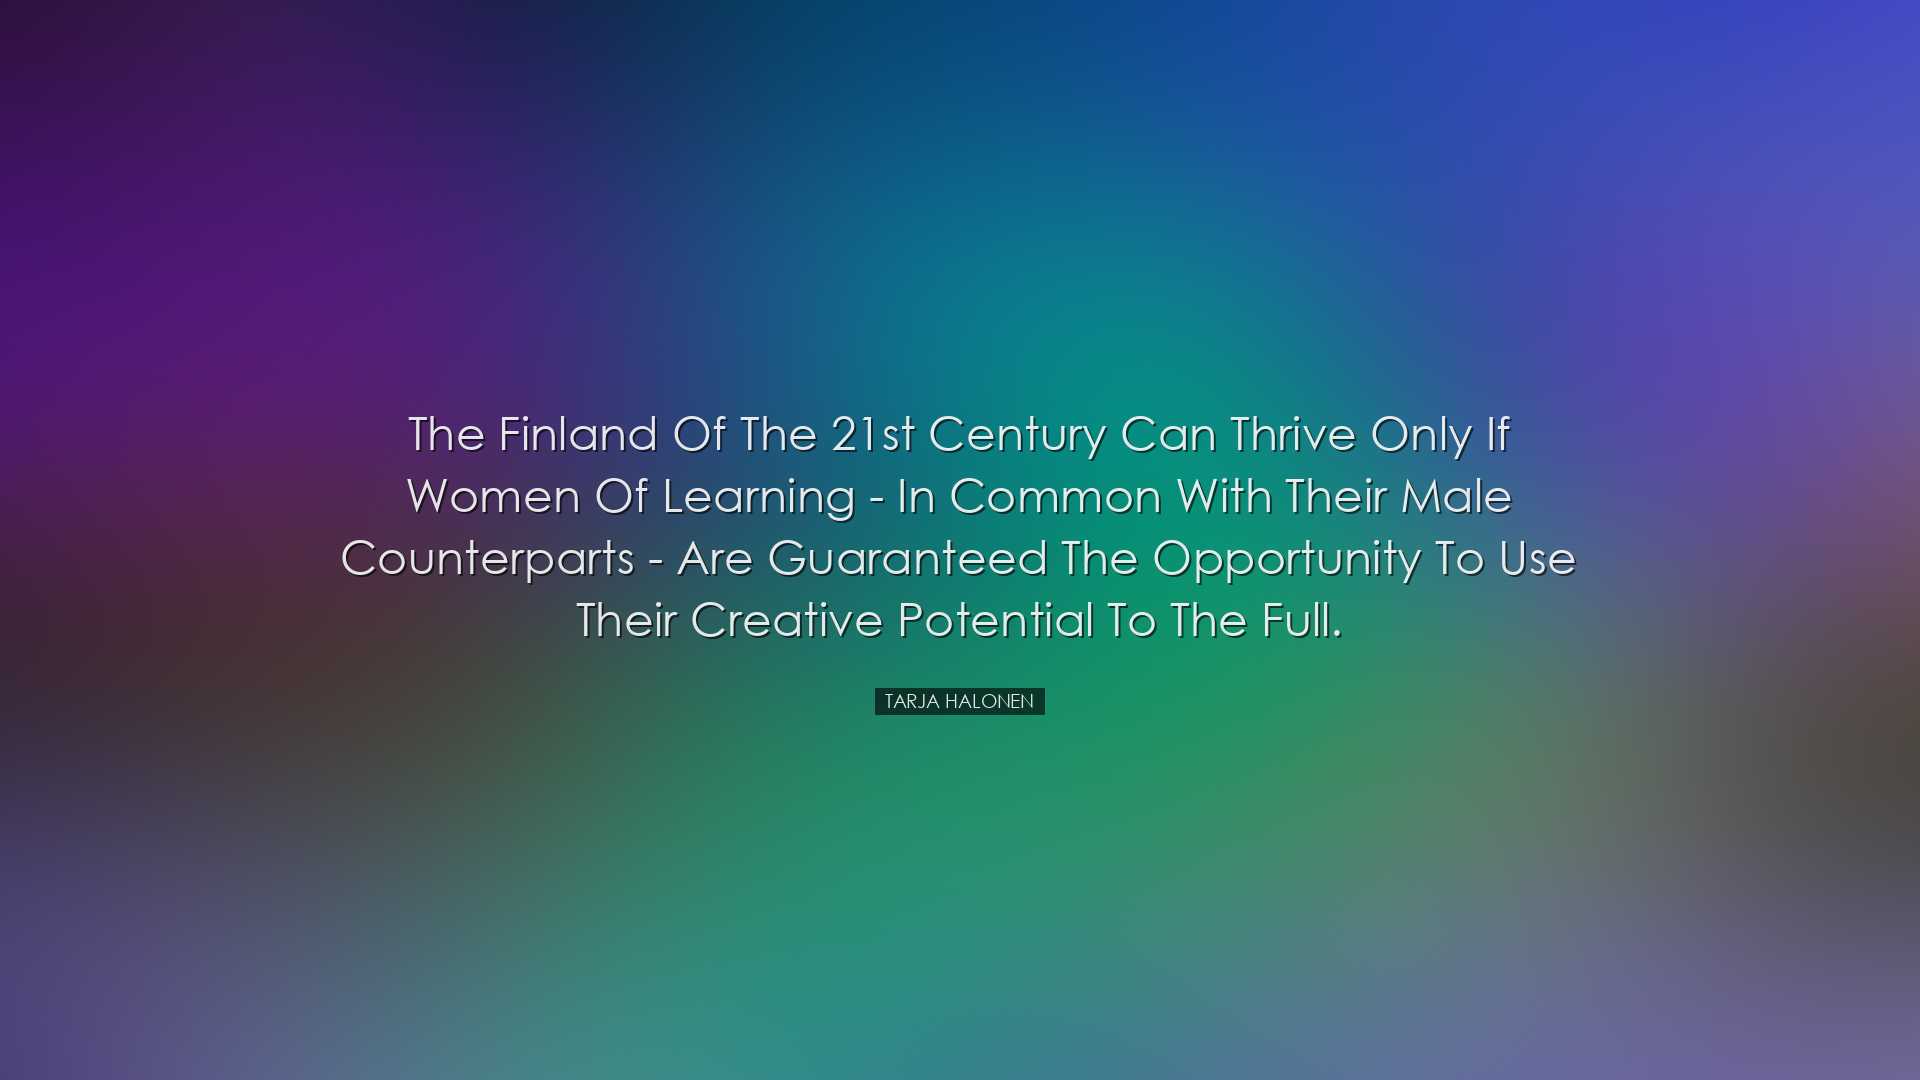 The Finland of the 21st century can thrive only if women of learni